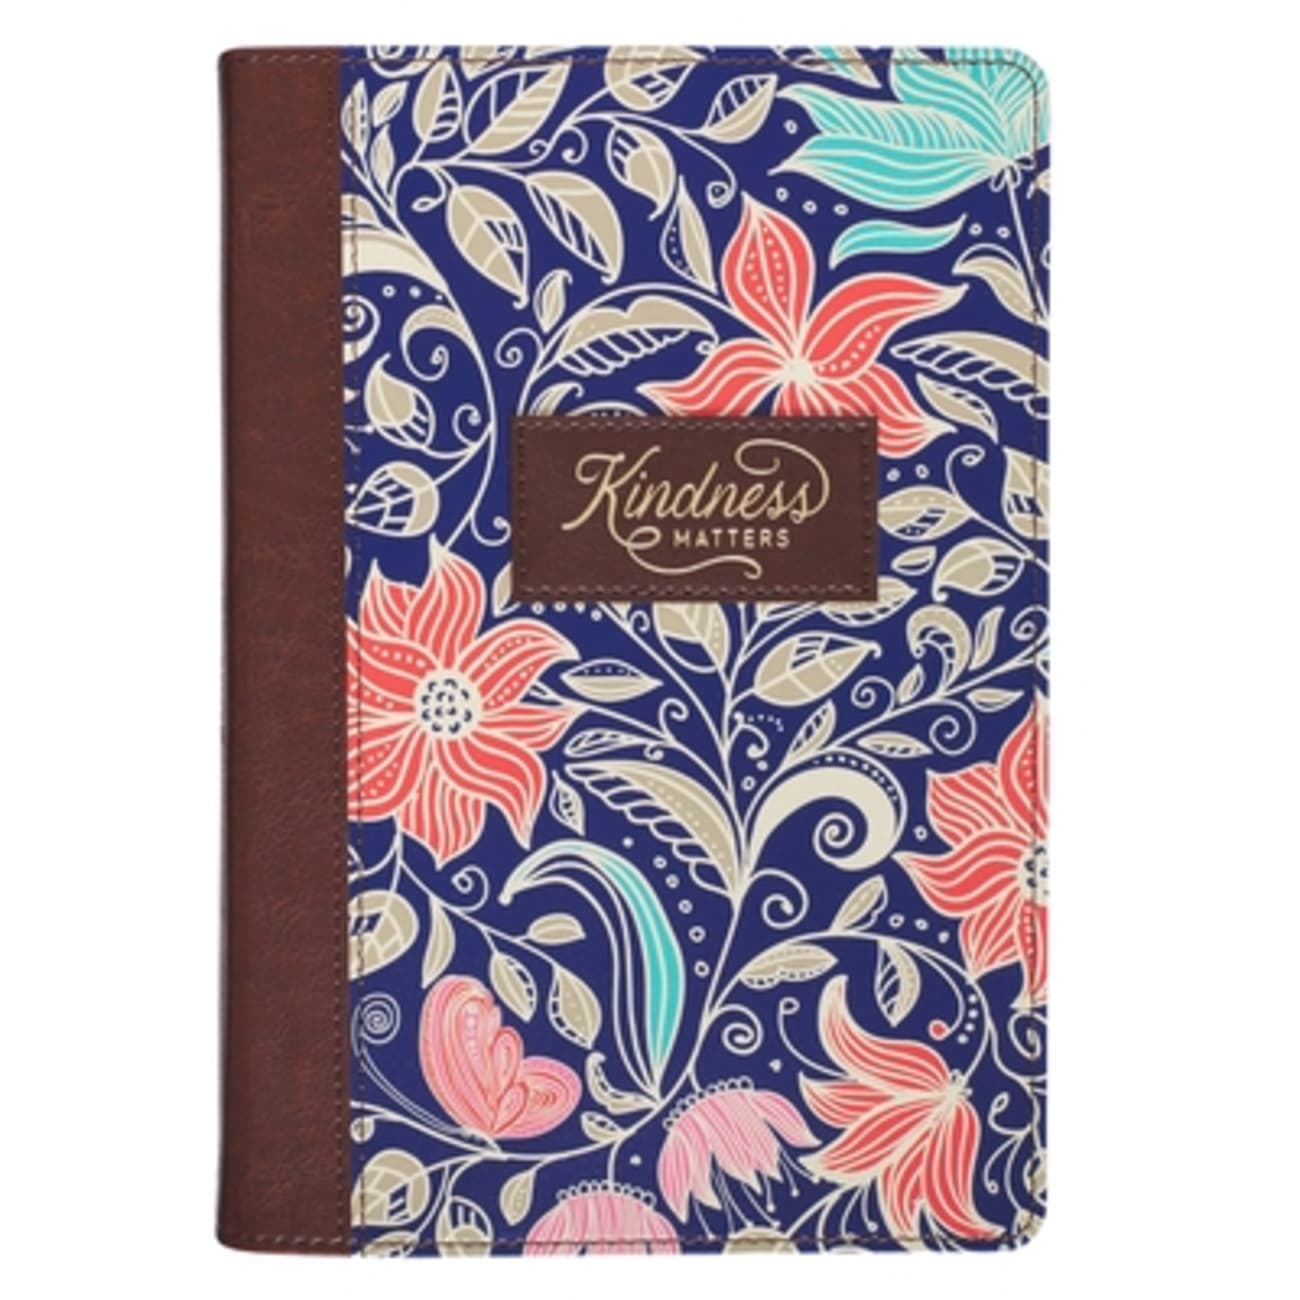 Classic Journal- Kindness Matters, Brown and Navy Floral With Ribbon Marker (Kindness Matters Collection) Imitation Leather